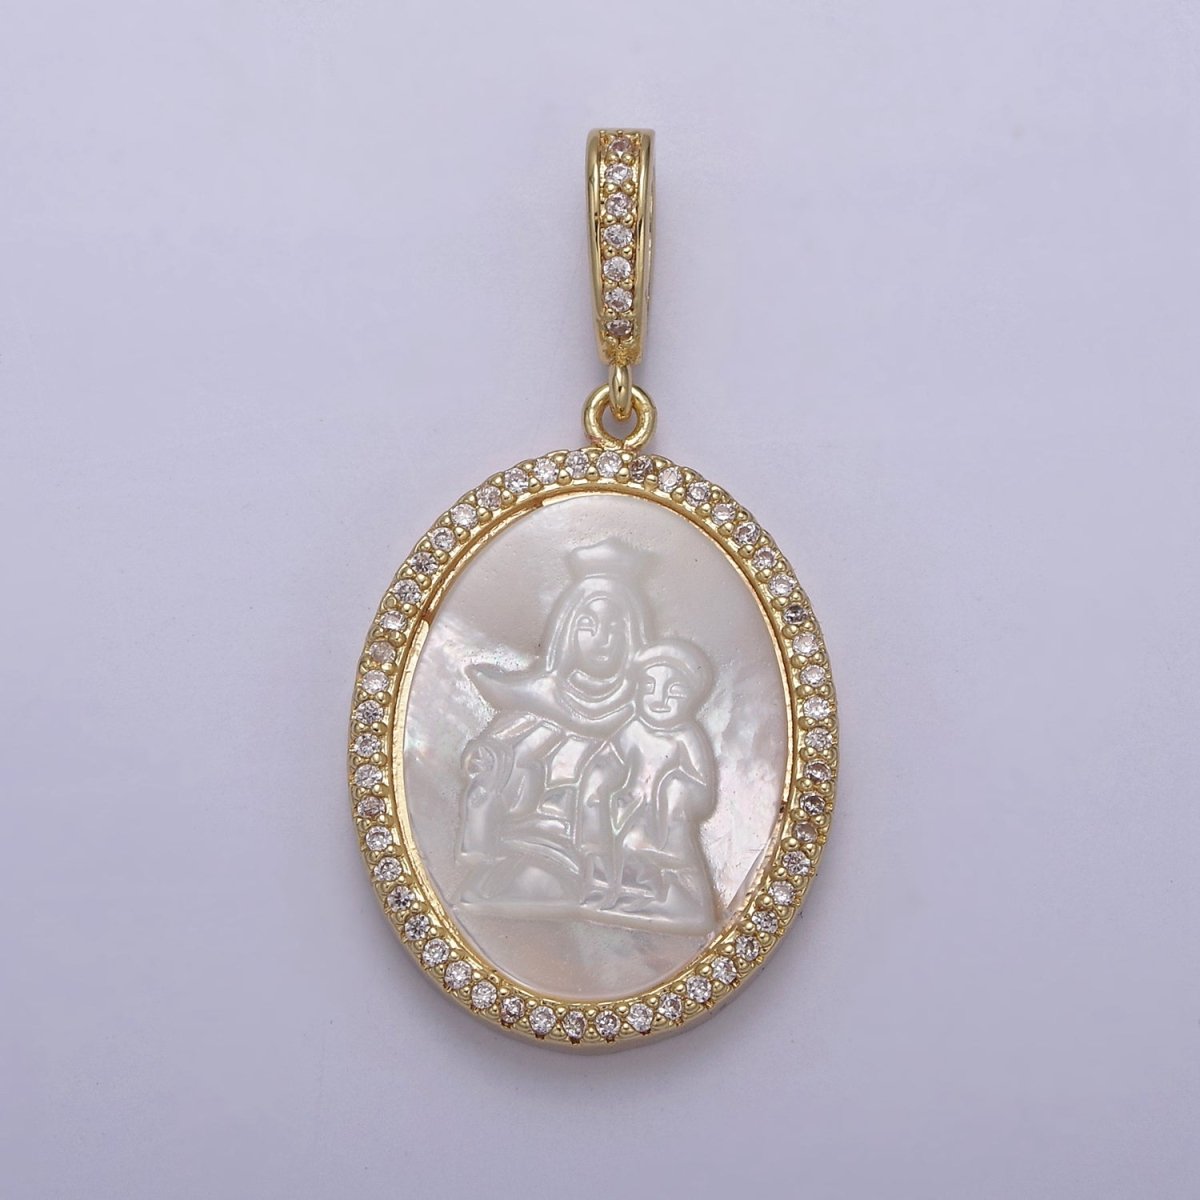 Pearl Virgin Mary Medallion Charm Gold Virgin Mary with baby Jesus pendant. Religious jewelry N-562 - DLUXCA